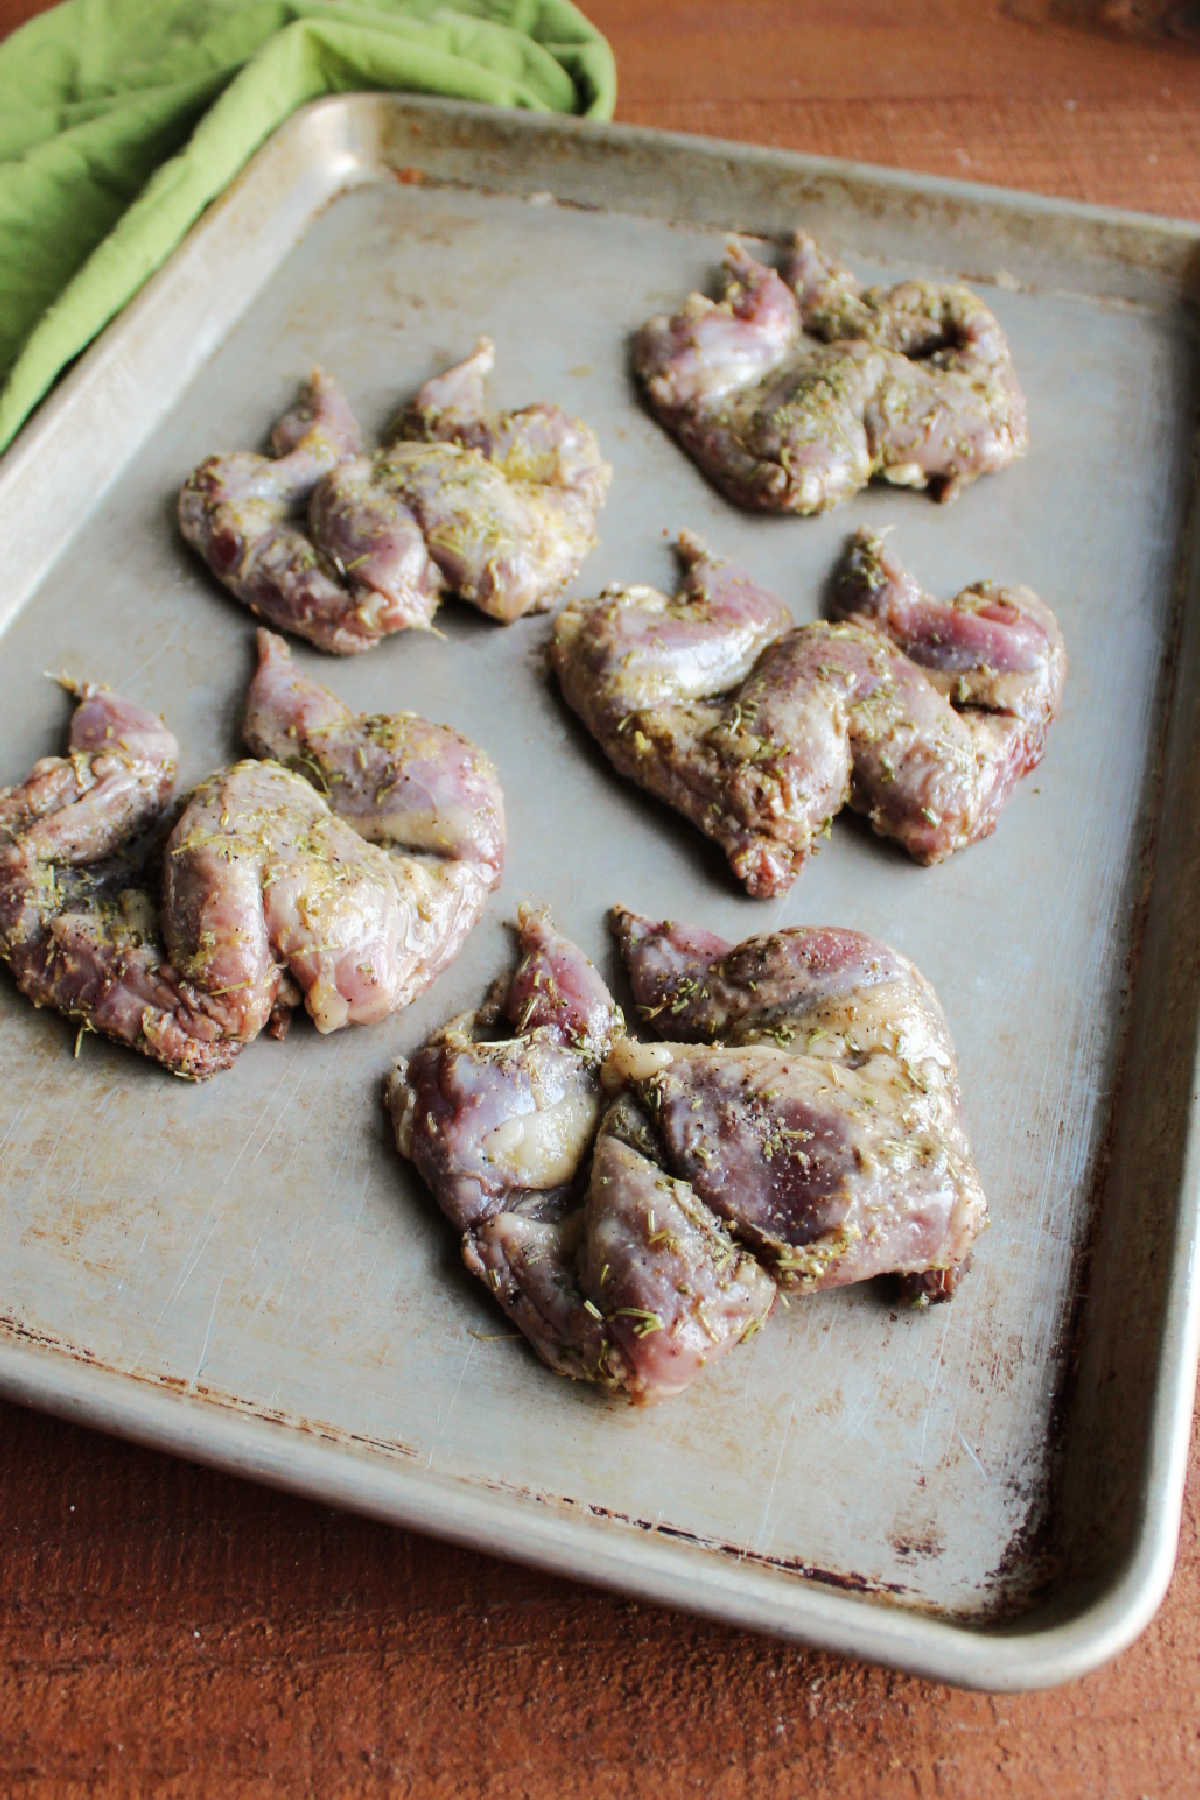 Spatchcocked quail spread out on sheet pan.